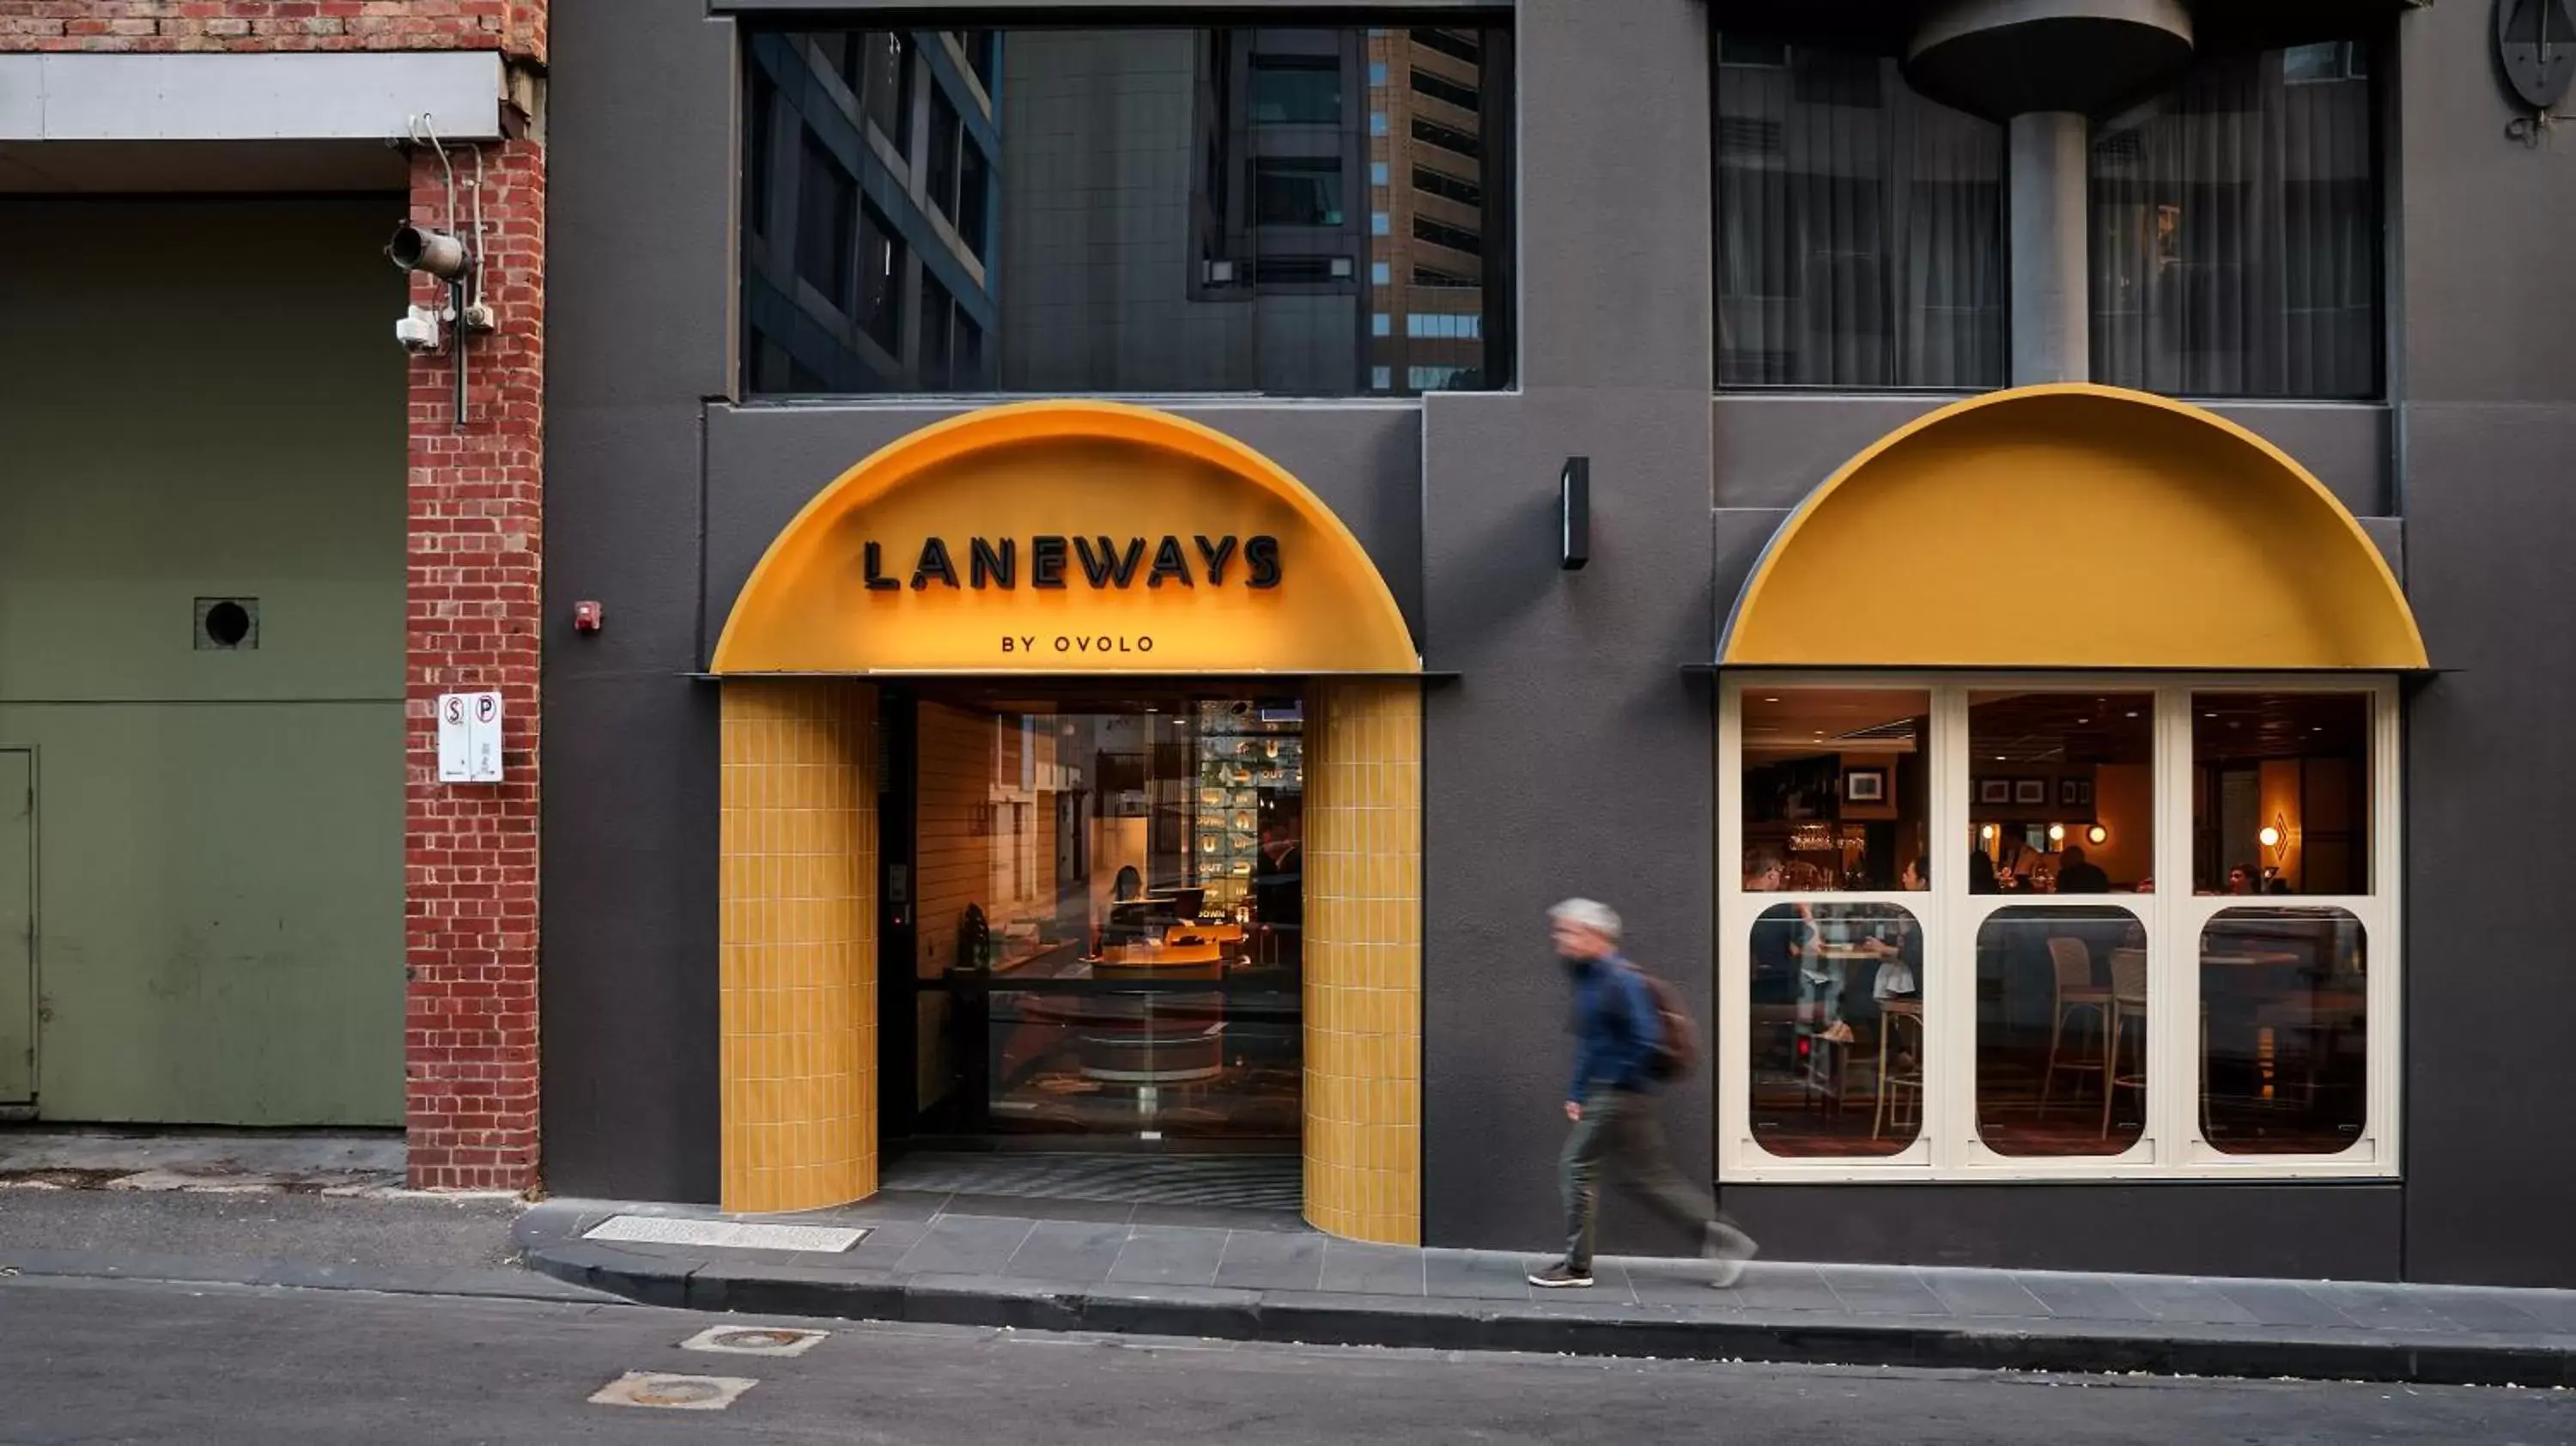 Property building in Laneways by Ovolo